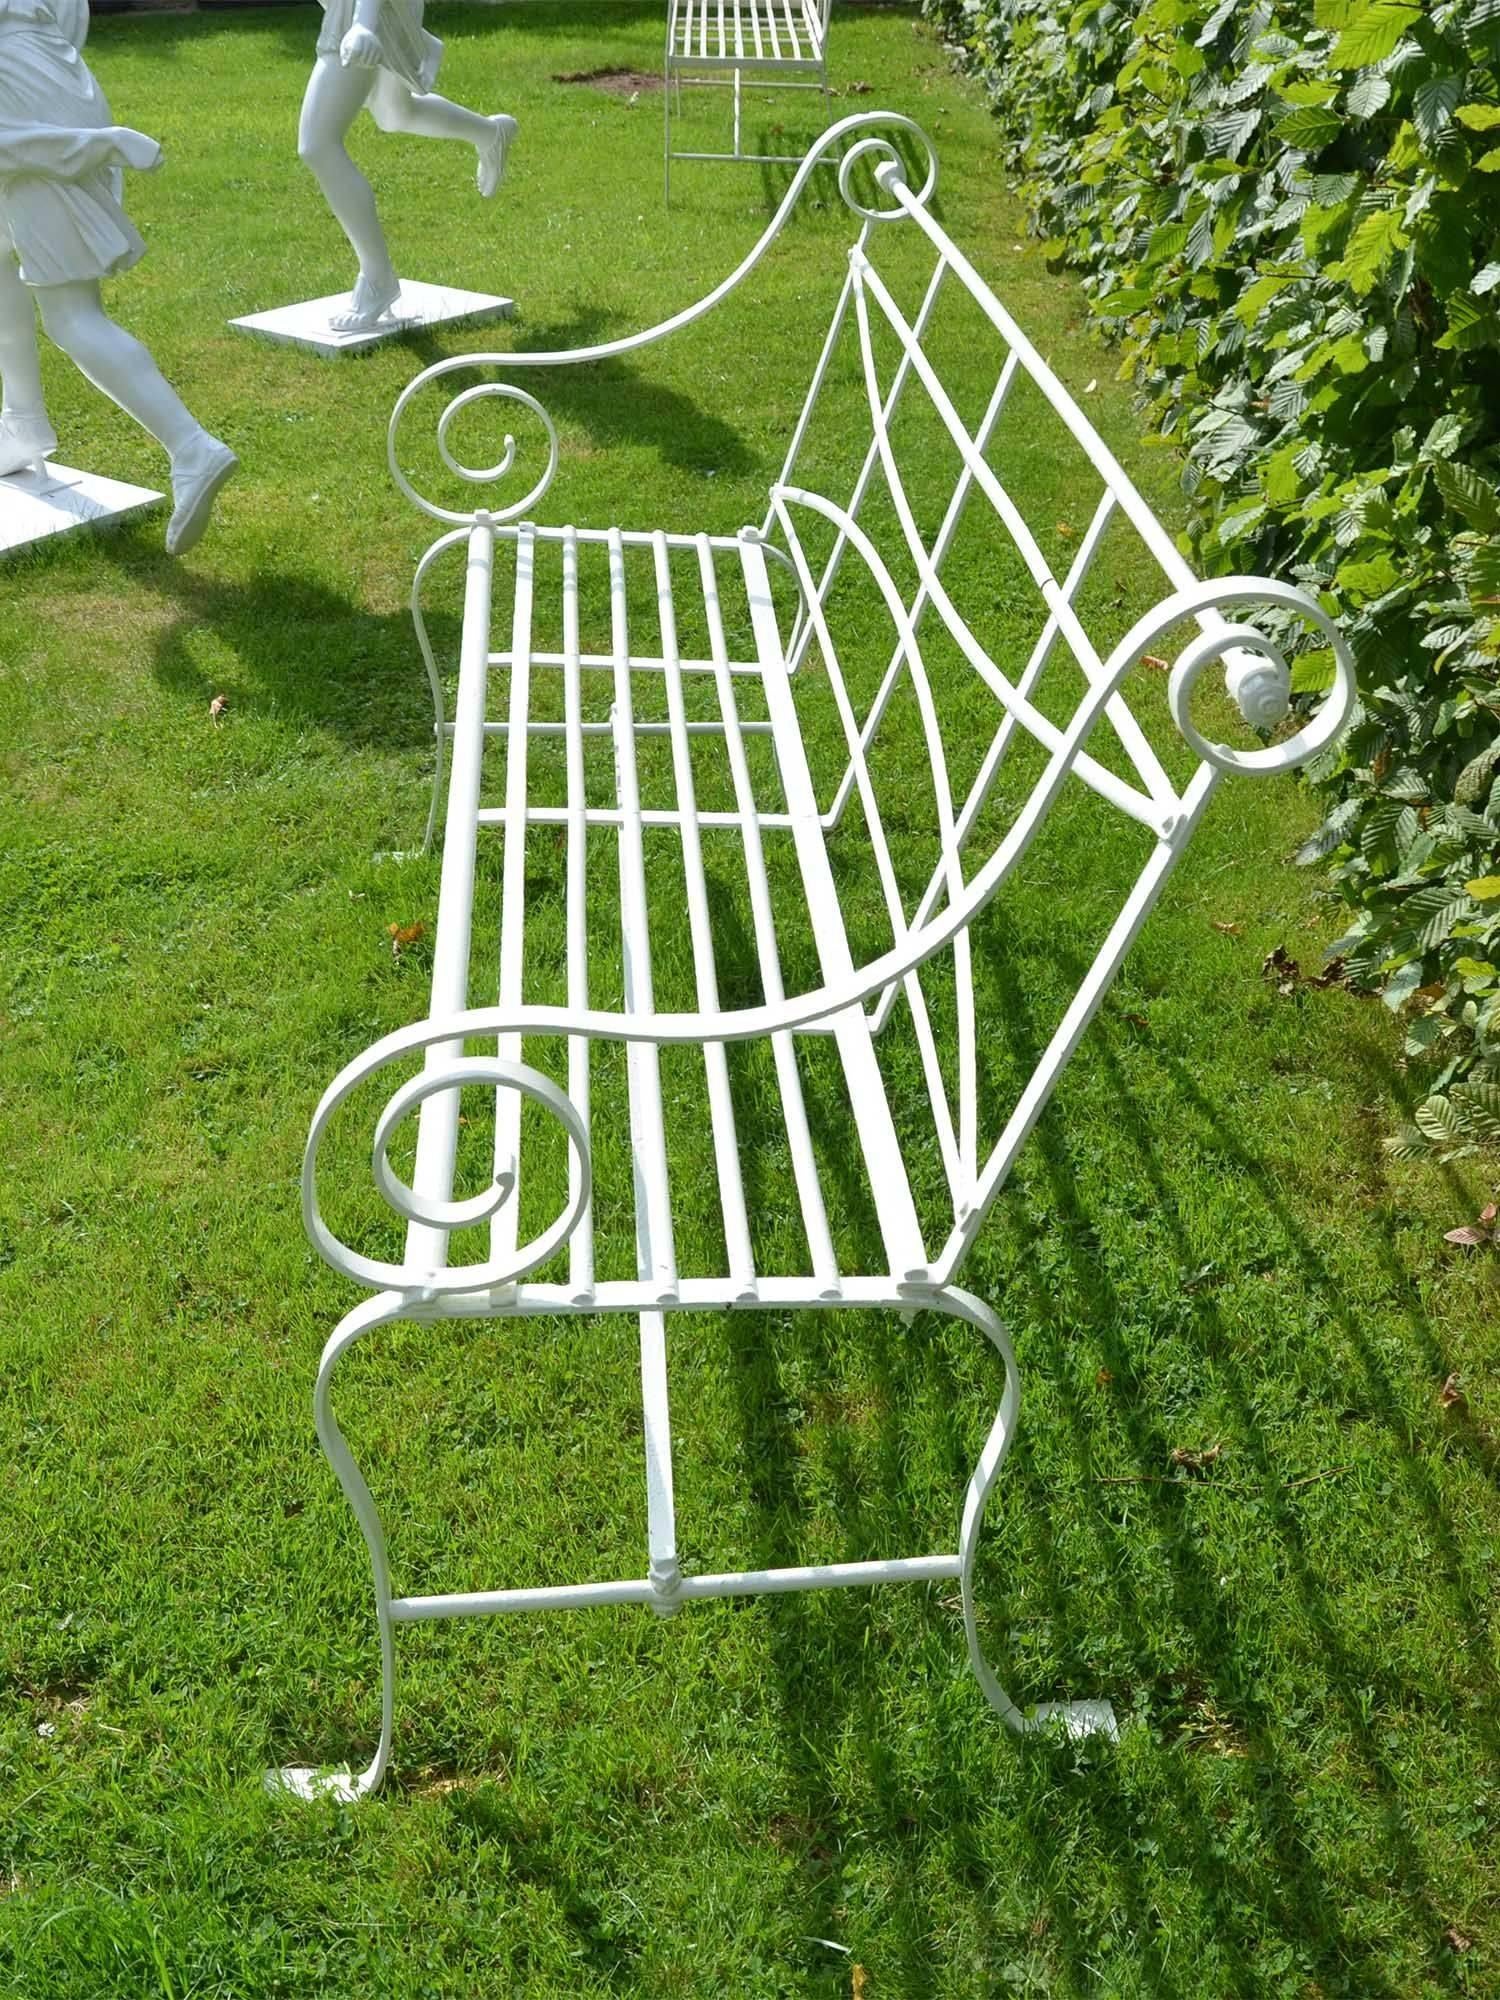 Mid-19th Century Wrought Iron Strap Work Garden Seat Having Cabriole Legs and Scroll Arms For Sale